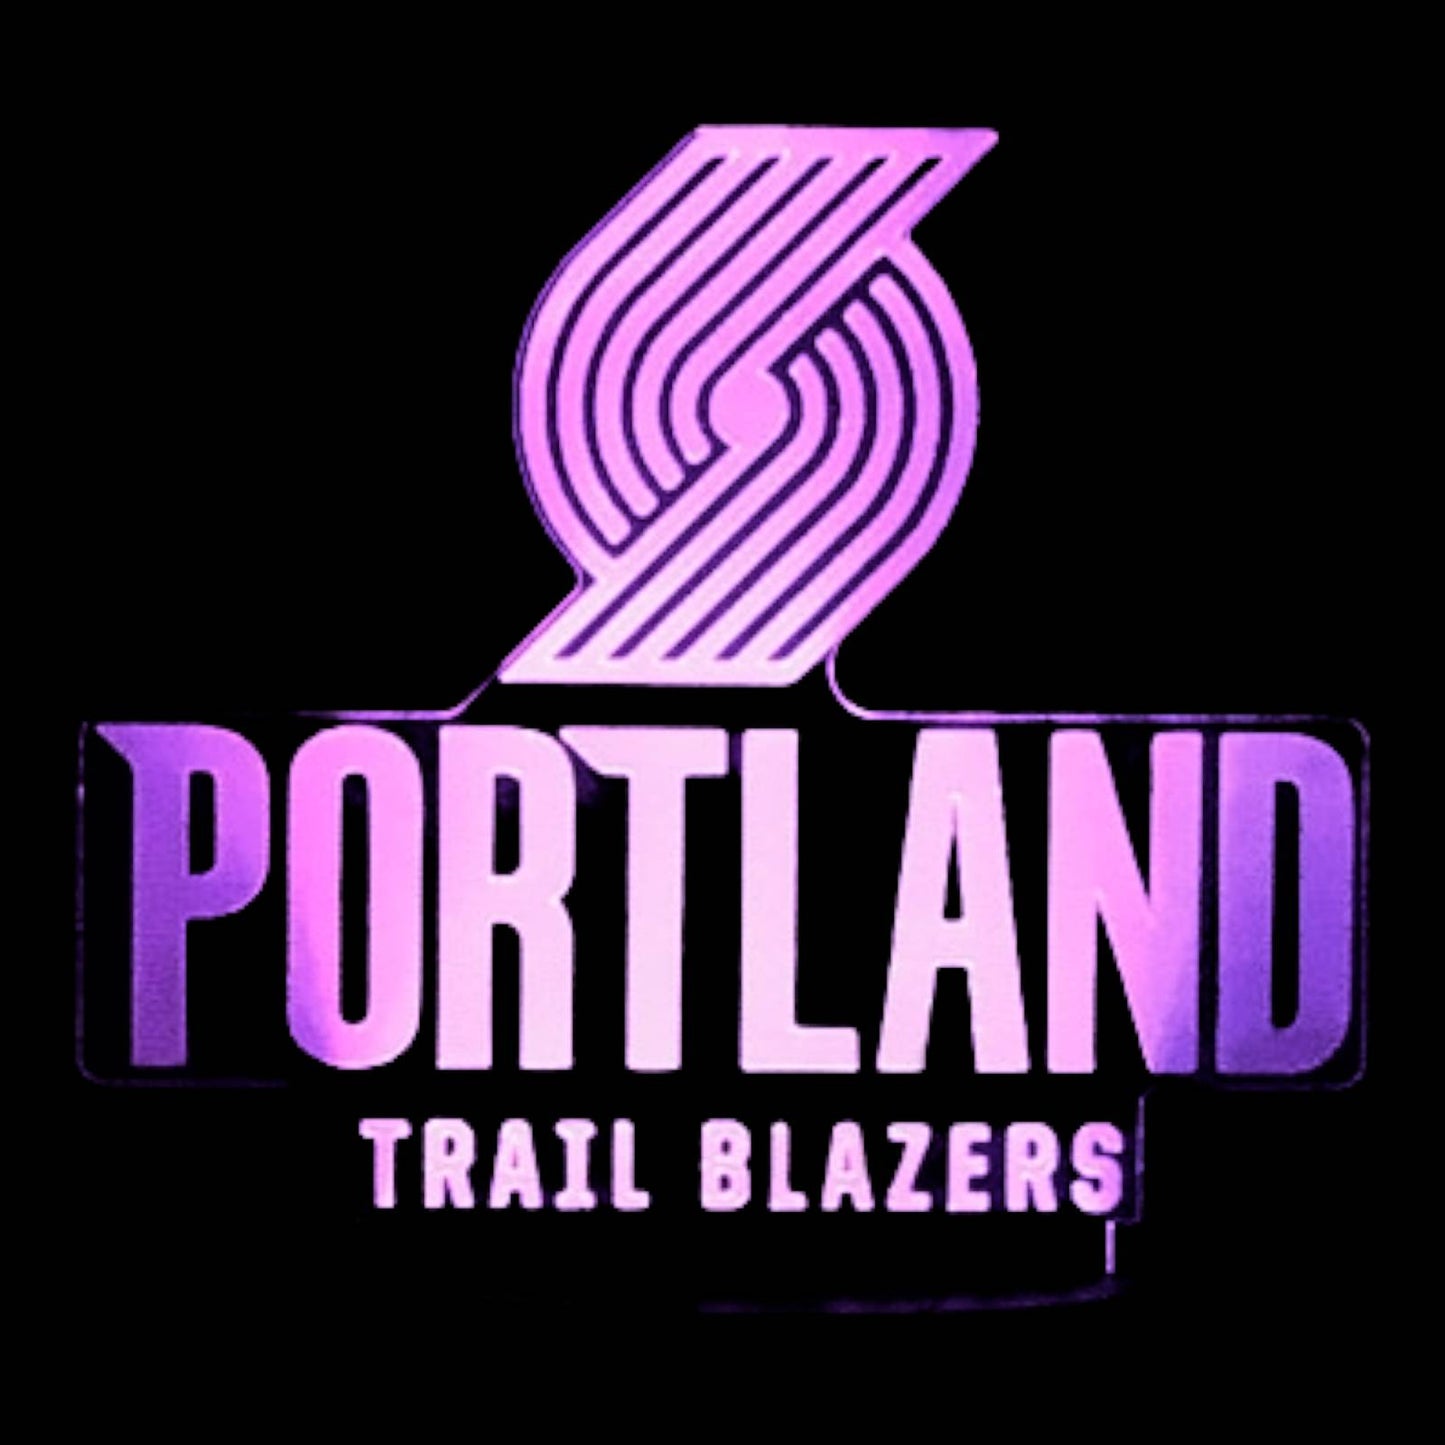 Portland Trail Blazers 3D LED Night-Light 7 Color Changing Lamp w/ Touch Switch